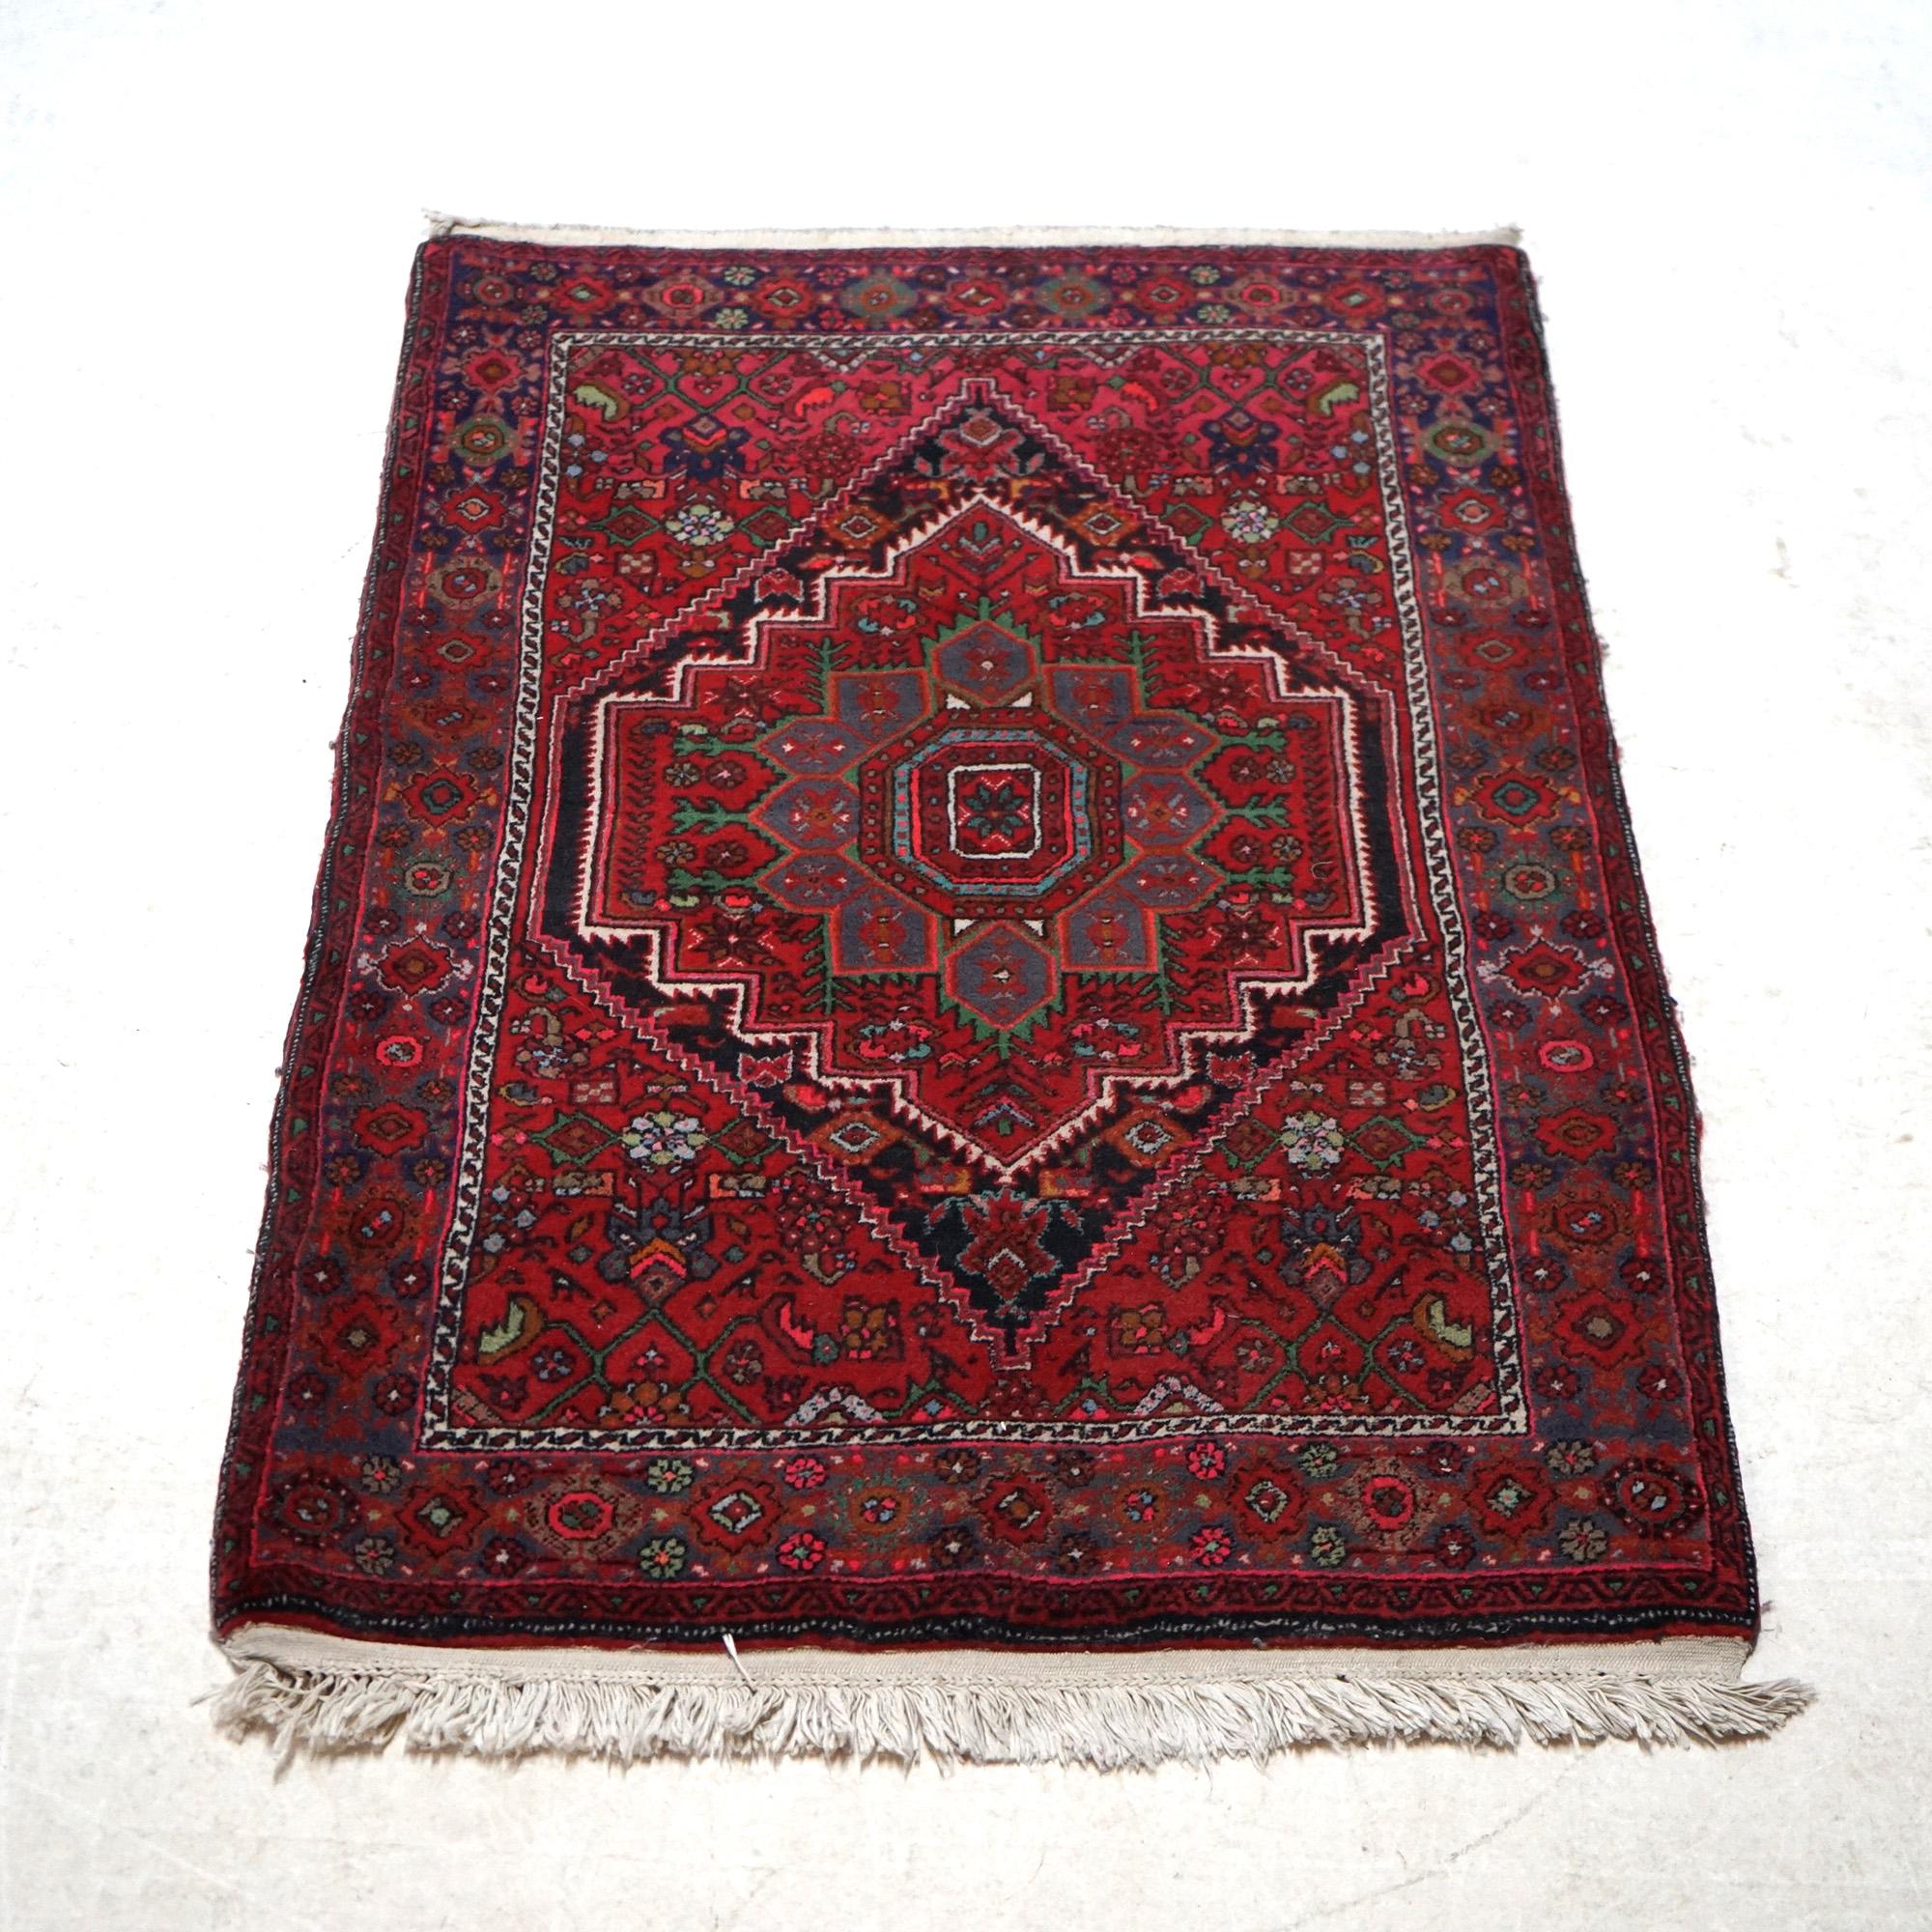 An oriental rug offers wool construction with central medallion and stylized floral and foliate elements throughout, 20th century

Measures - 49.75